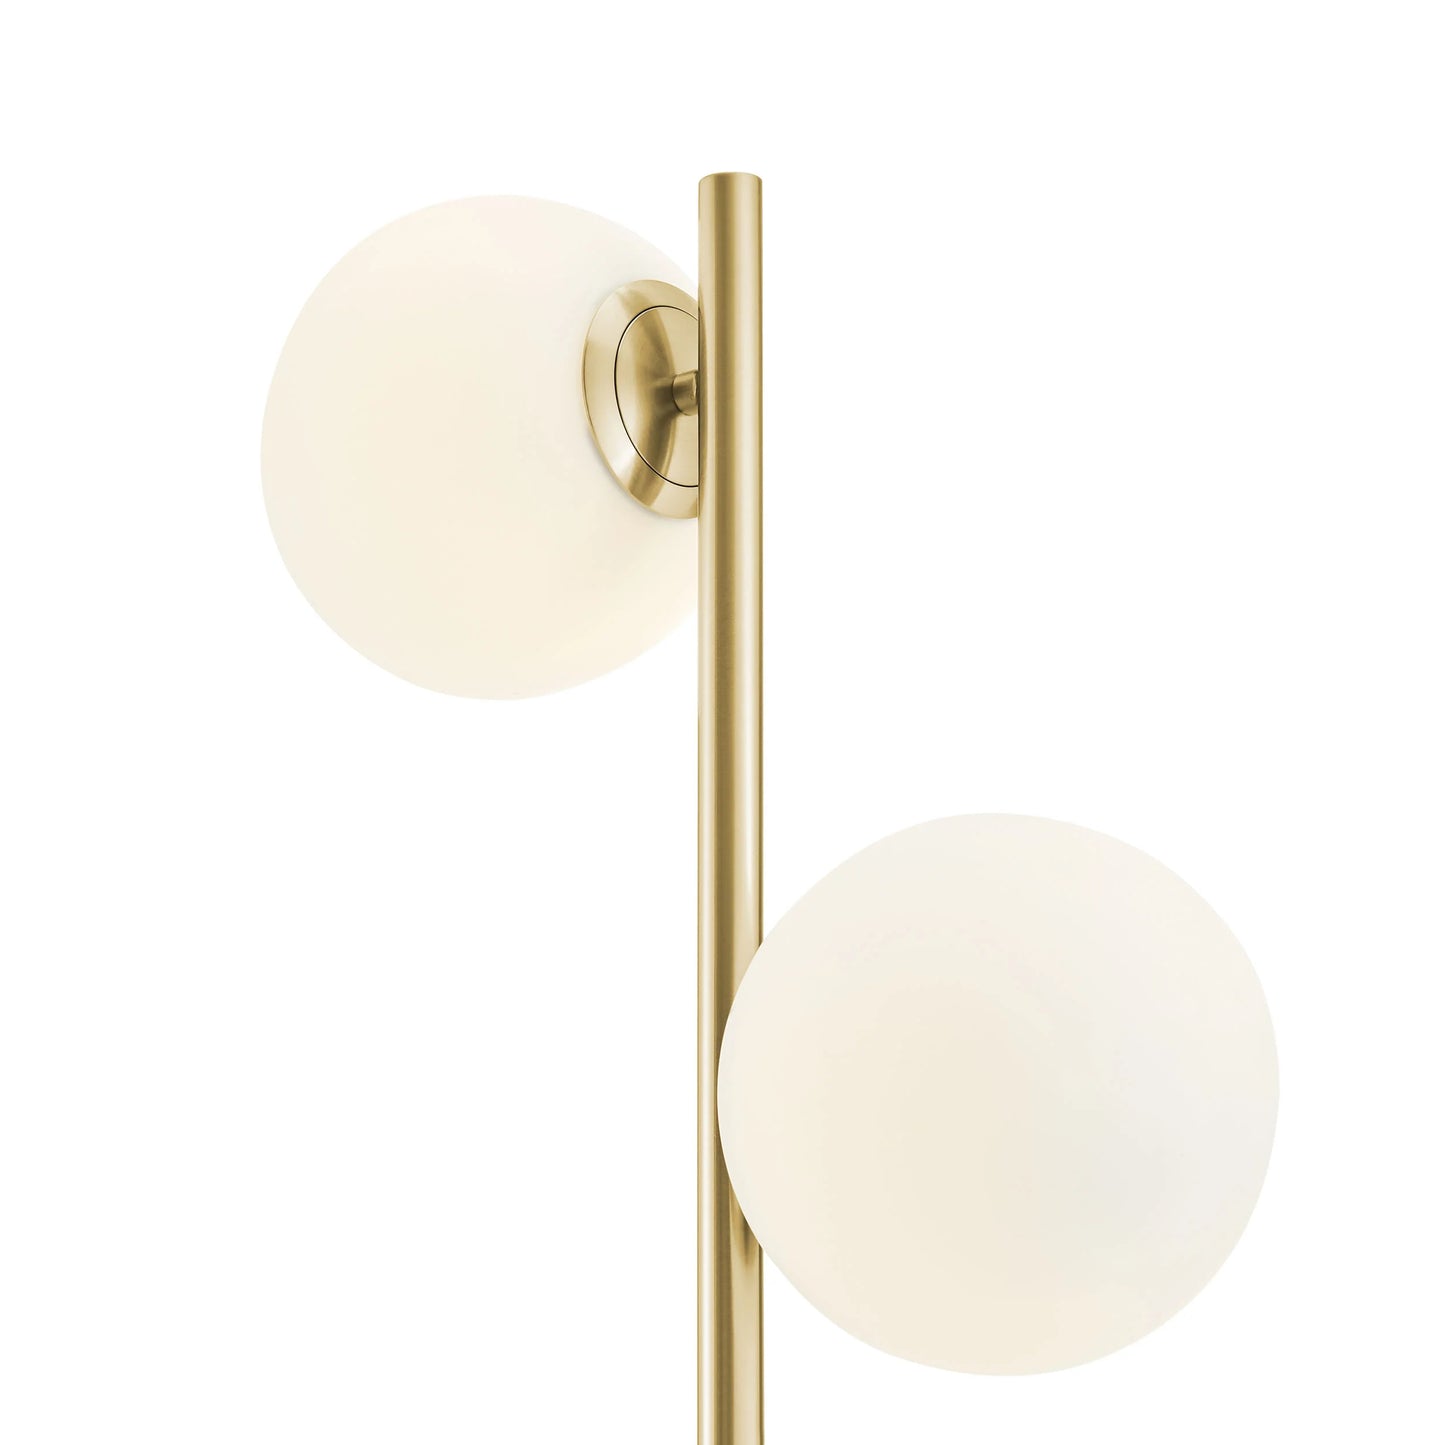 Finesse Decor Anechdoche 2 Lights Gold and White Floor Lamp 3